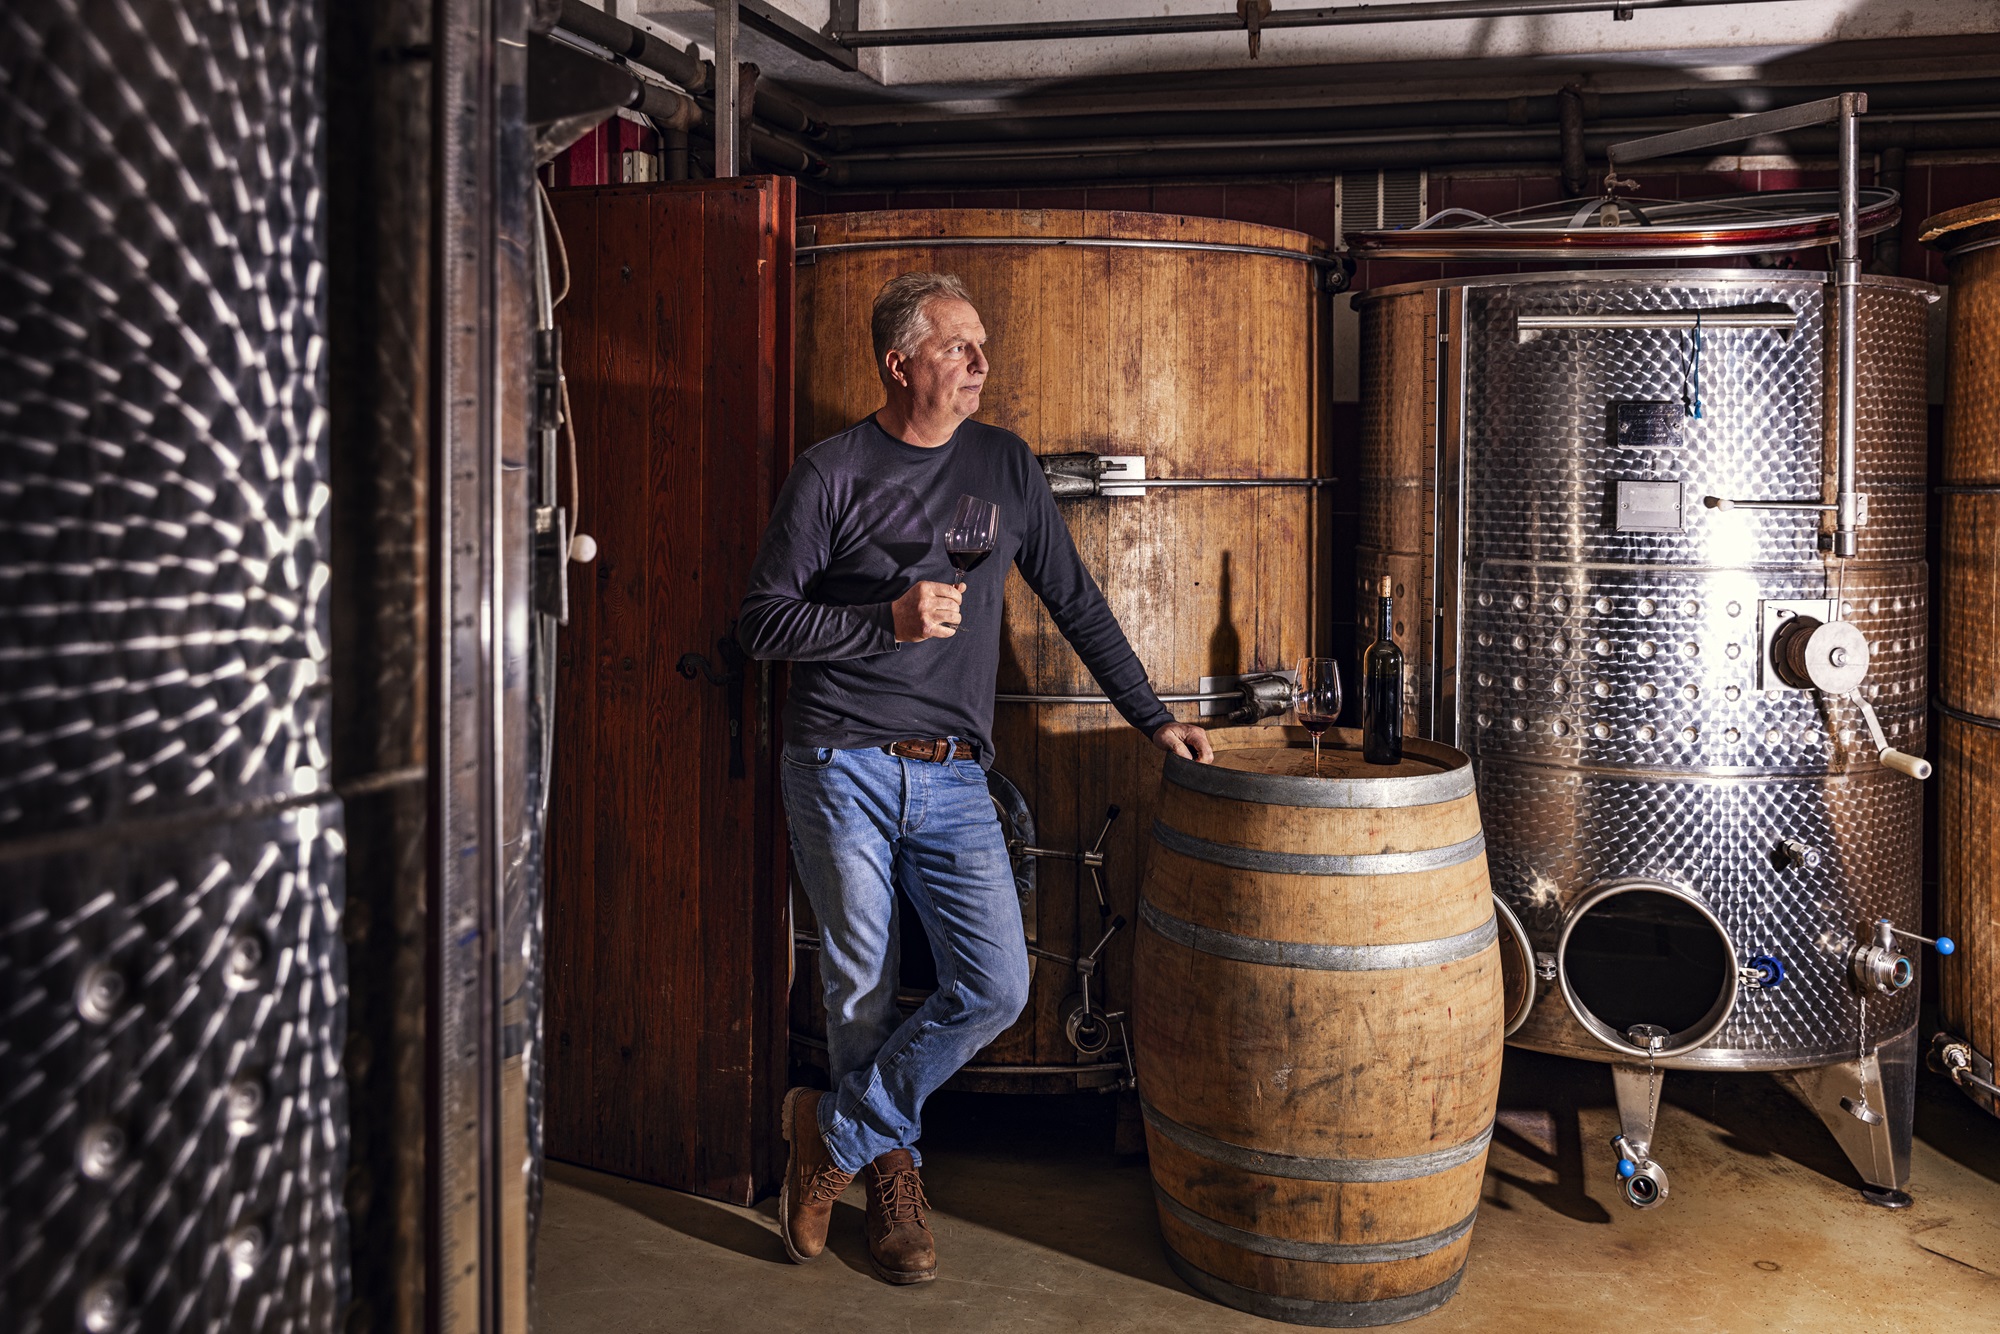 I would like to have better wine, not more wine - In conversation with Csaba Török